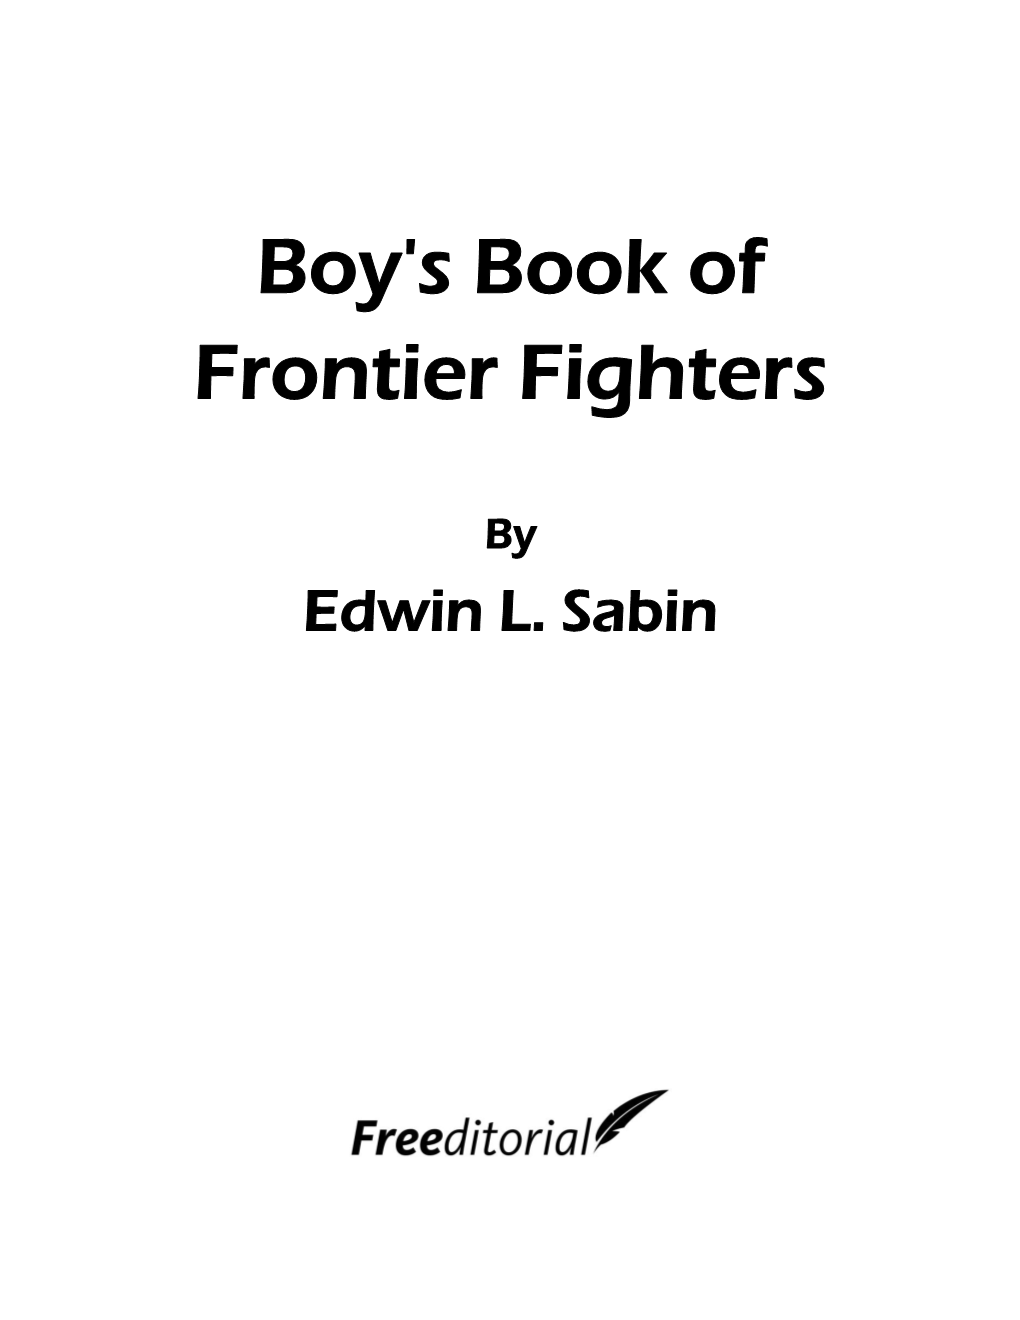 Boy's Book of Frontier Fighters